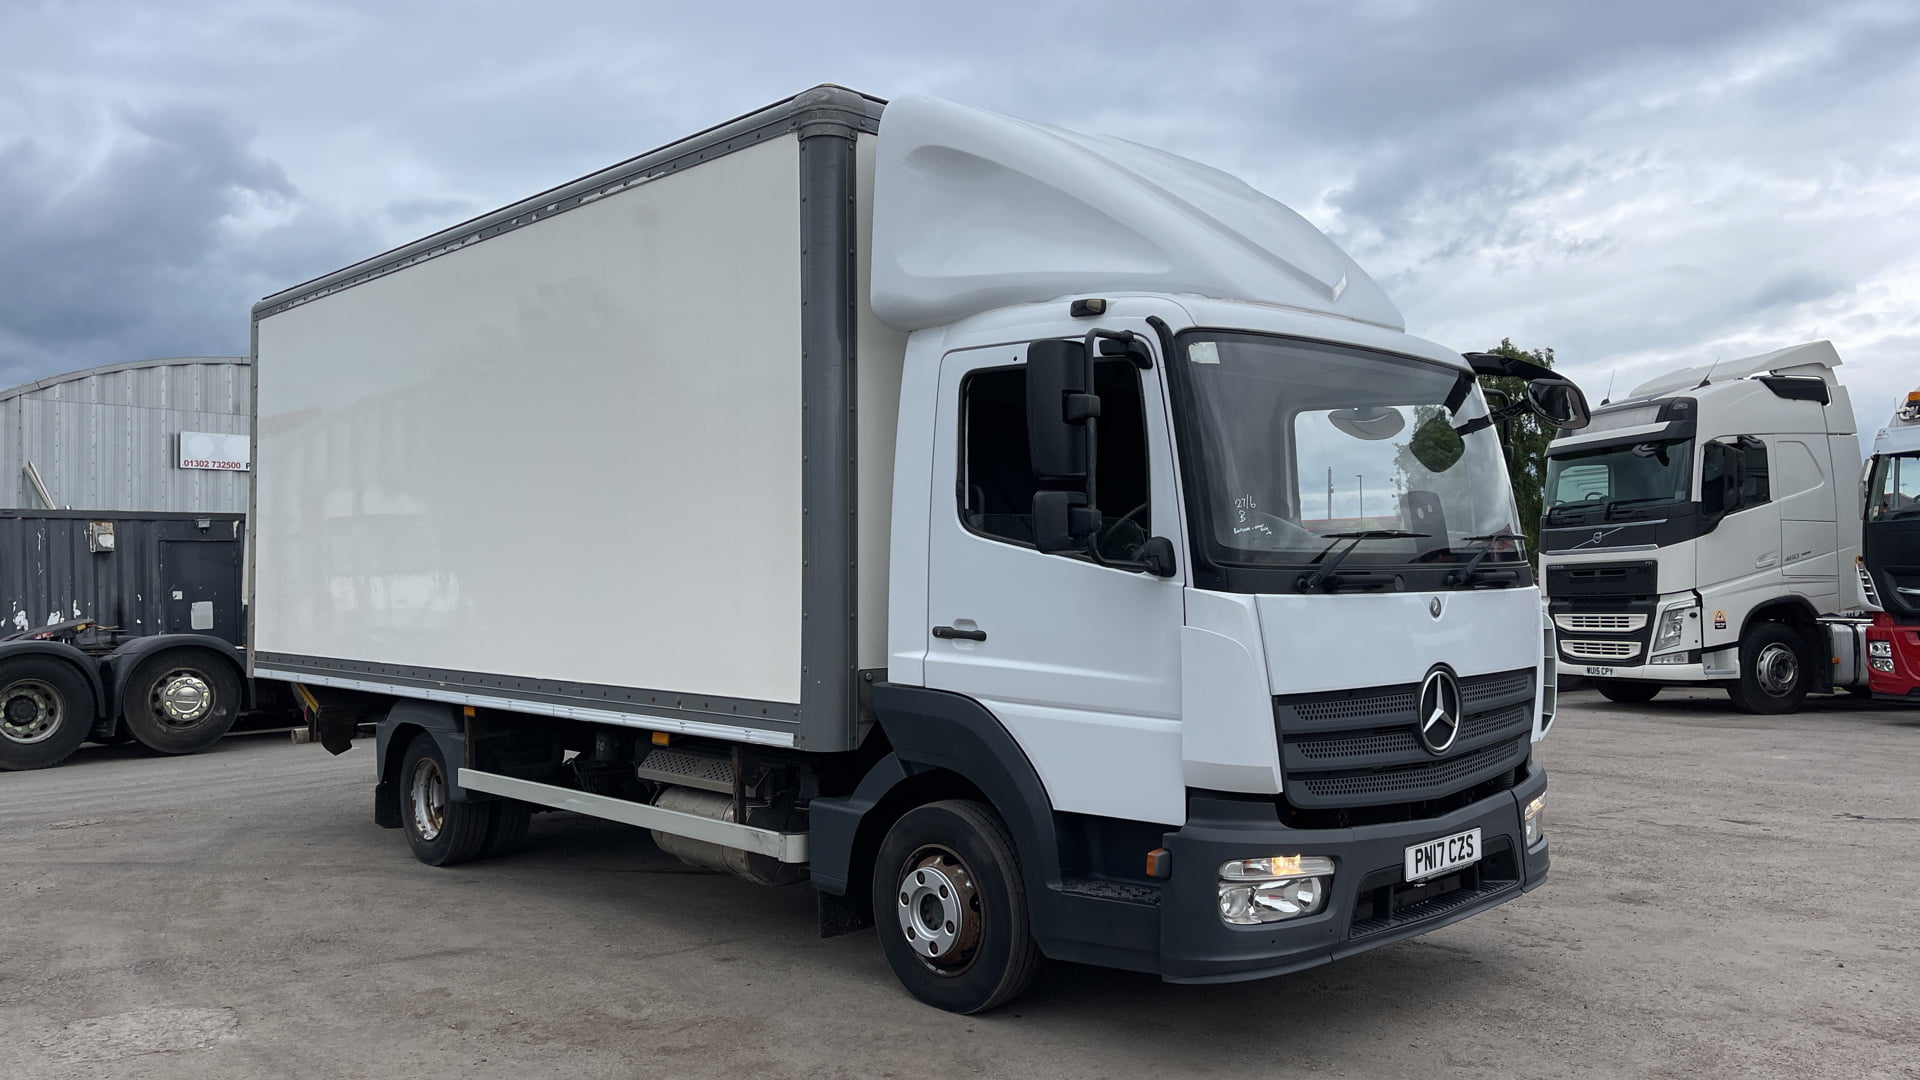 2017 Mercedes Atego Boxvan, 7.5 Tonne, Euro 6, 160bhp, Roller Shutter Rear Door, 2 x Load Lock Rails, Low Mileage, Automatic Gearbox, Steering Wheel Controls, Electric Windows, Choice, Warranty & Finance Options also Available.